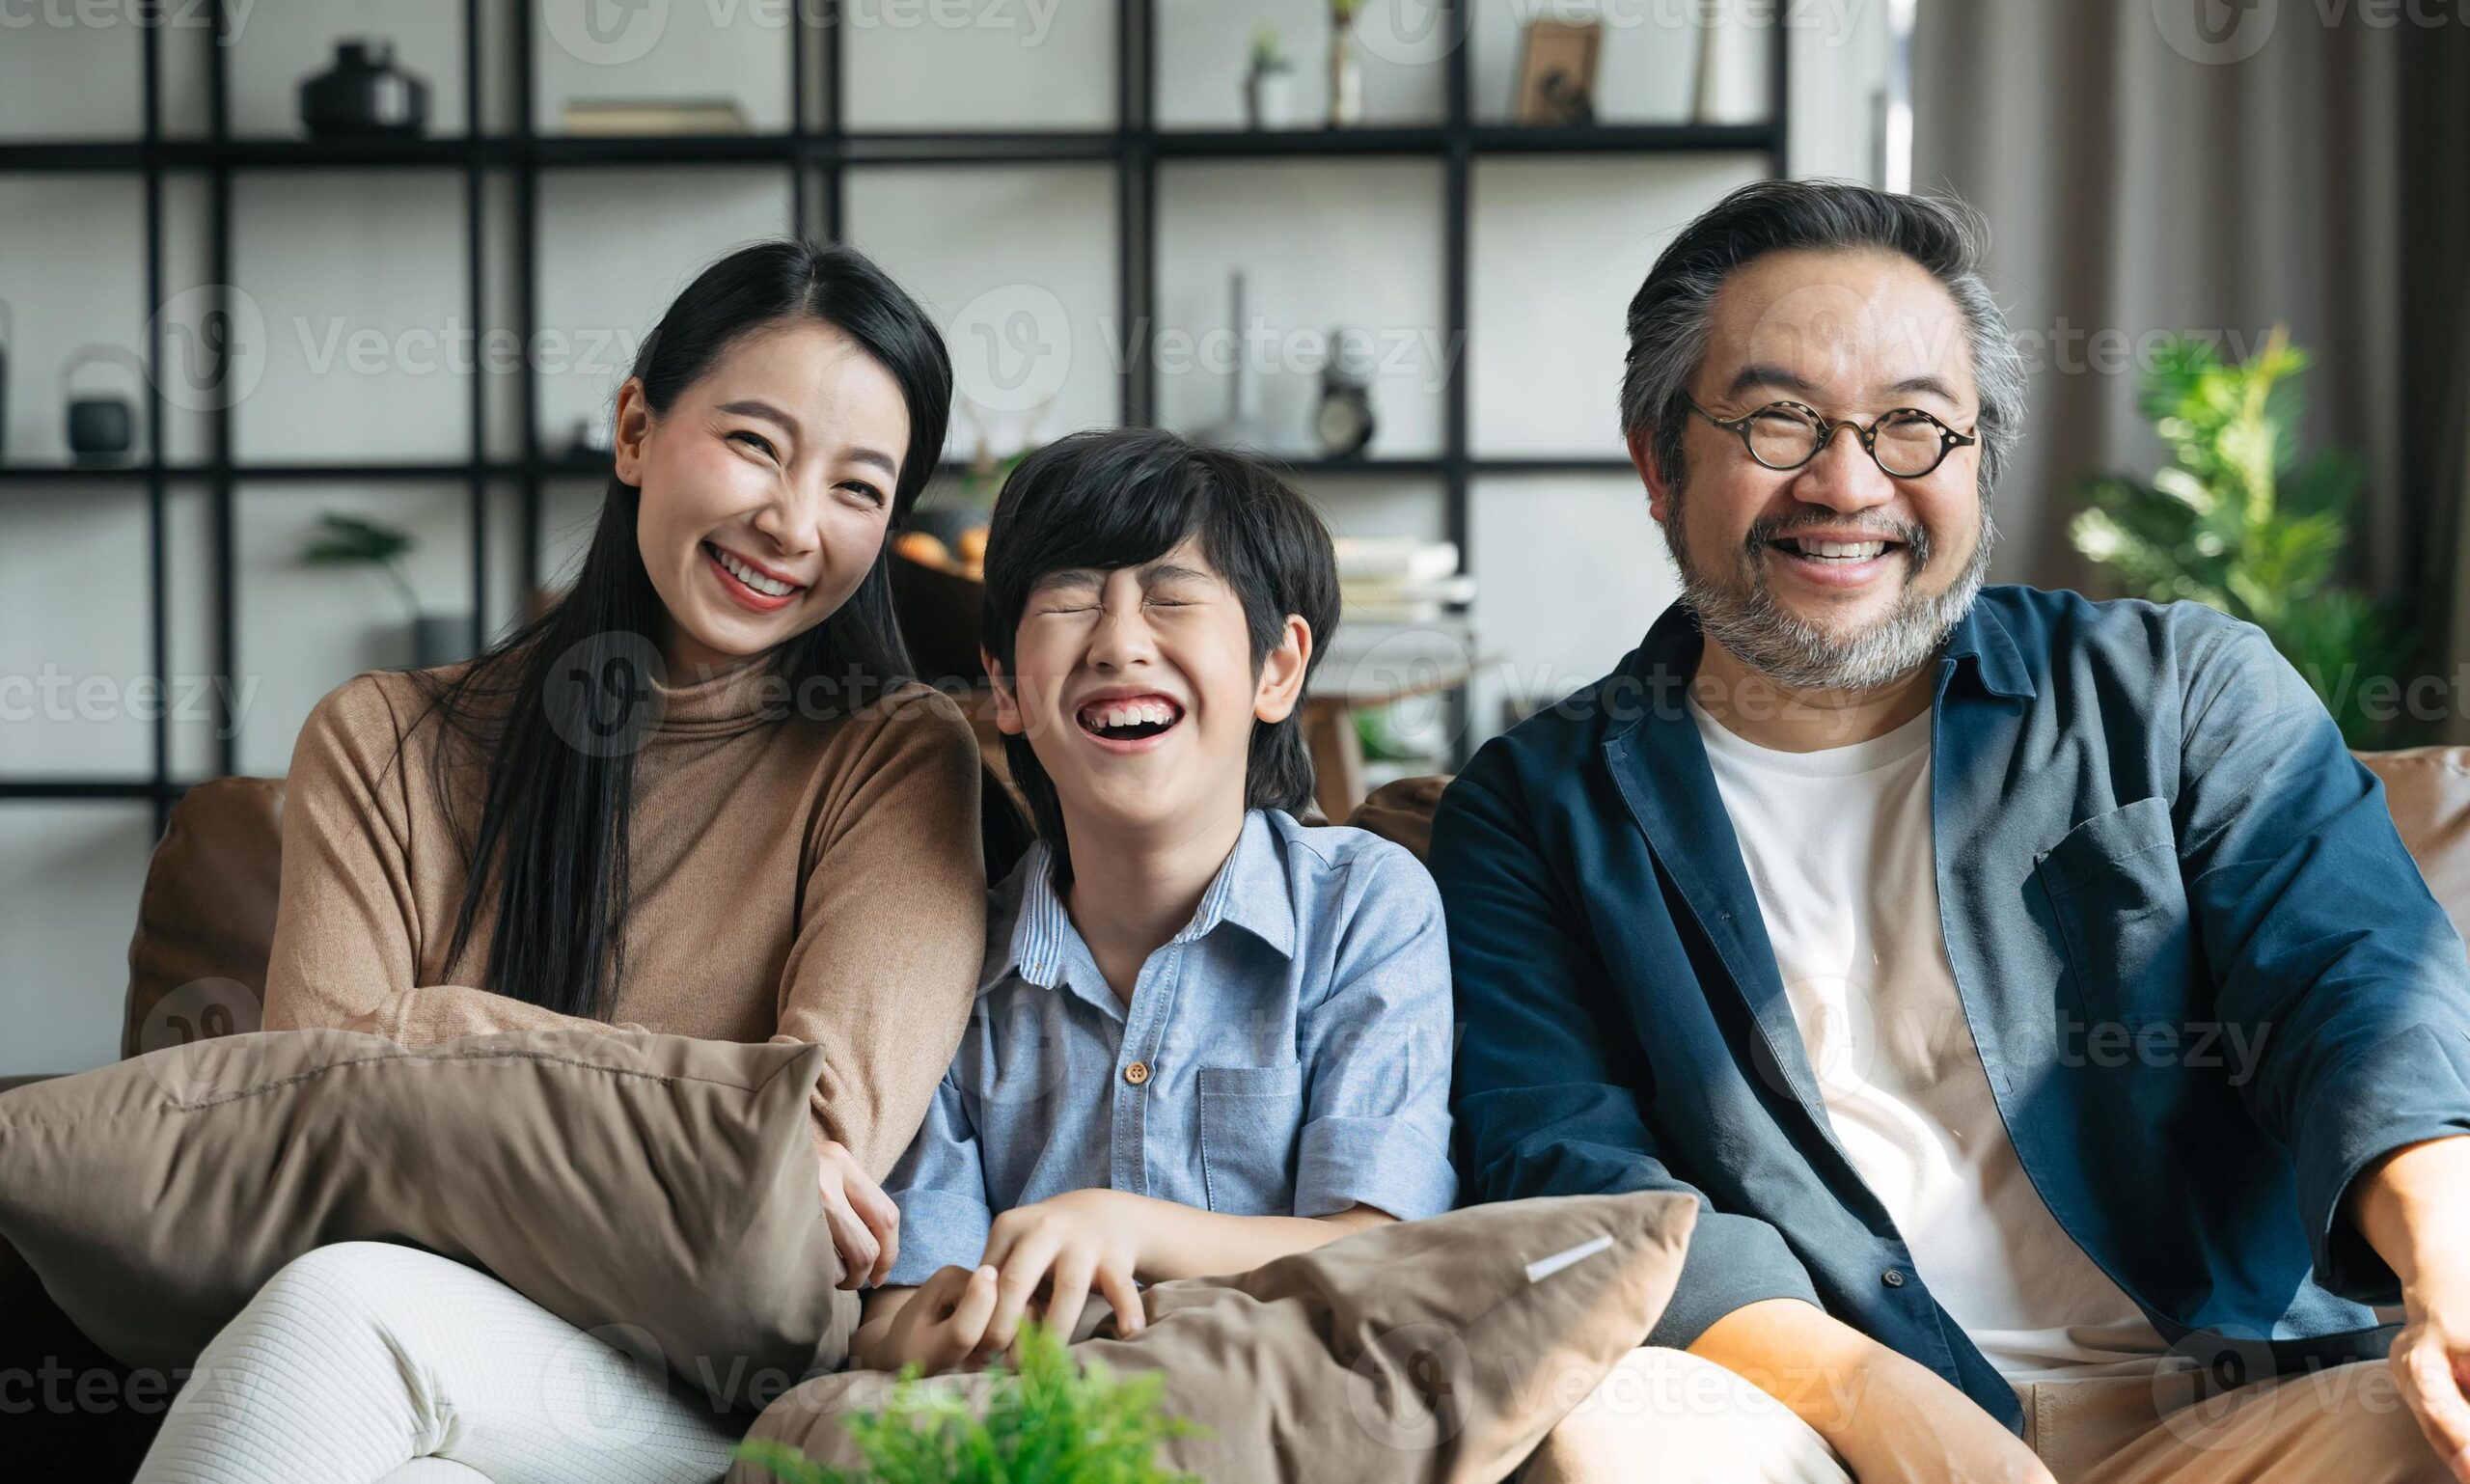 portrait-of-happy-asian-family-spending-time-together-on-sofa-in-living-room-family-and-home-concept-photo